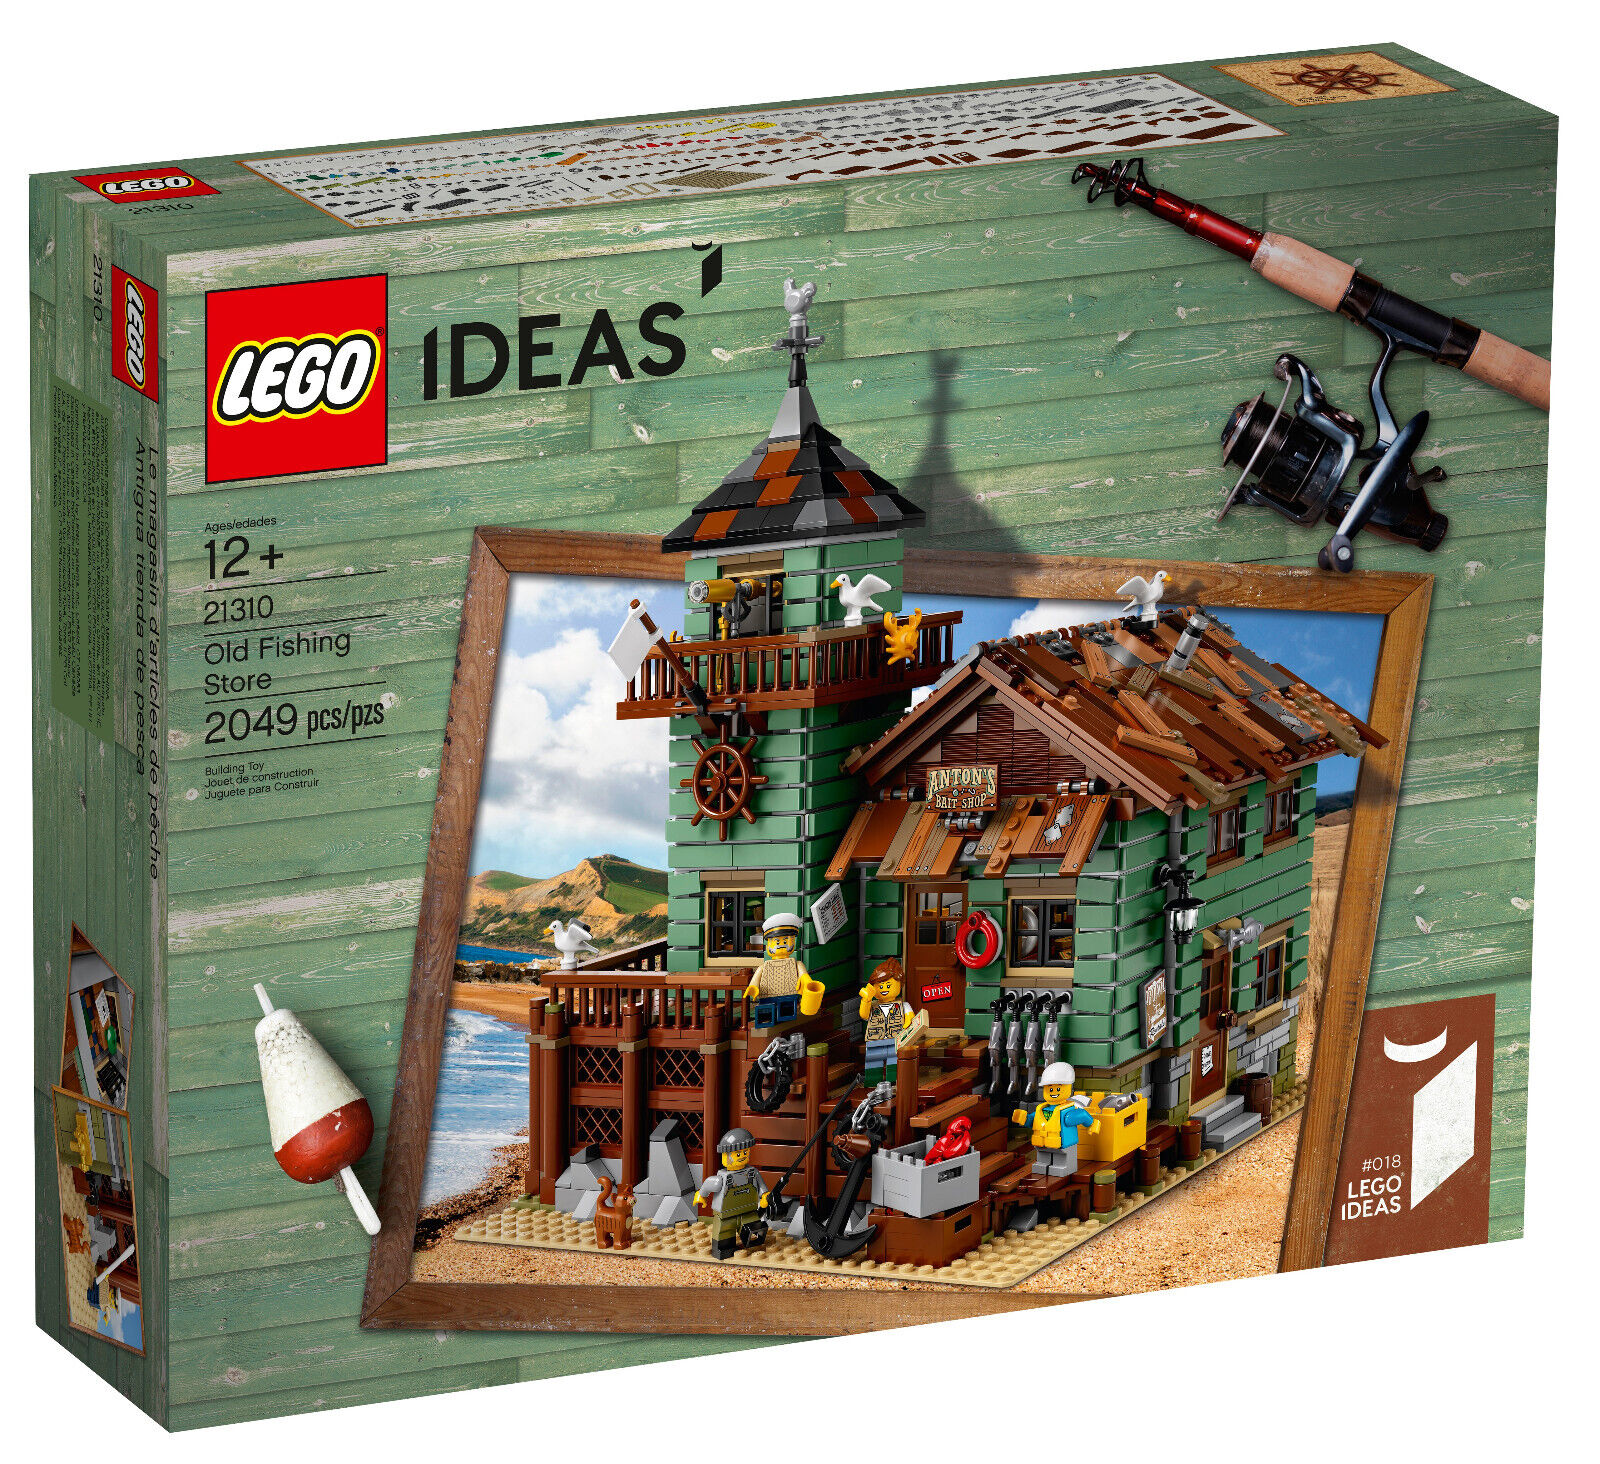 LEGO Ideas - Old Fishing Store 21310 -NEW - See Pictures